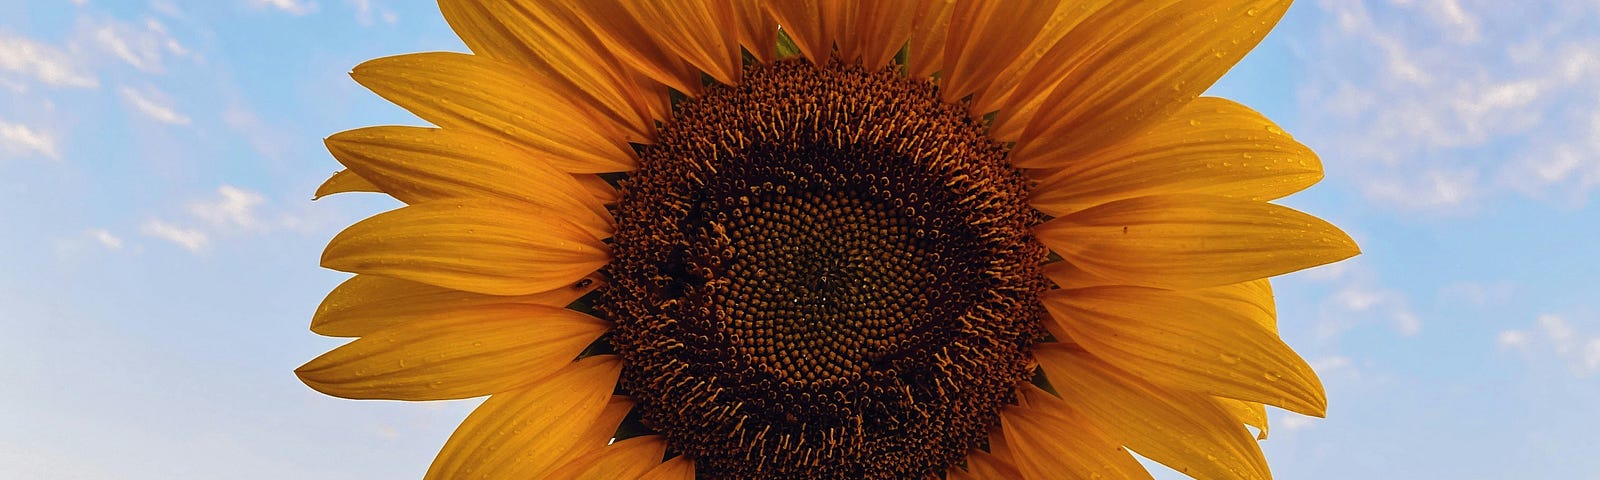 A sunflower representing both plants and joy